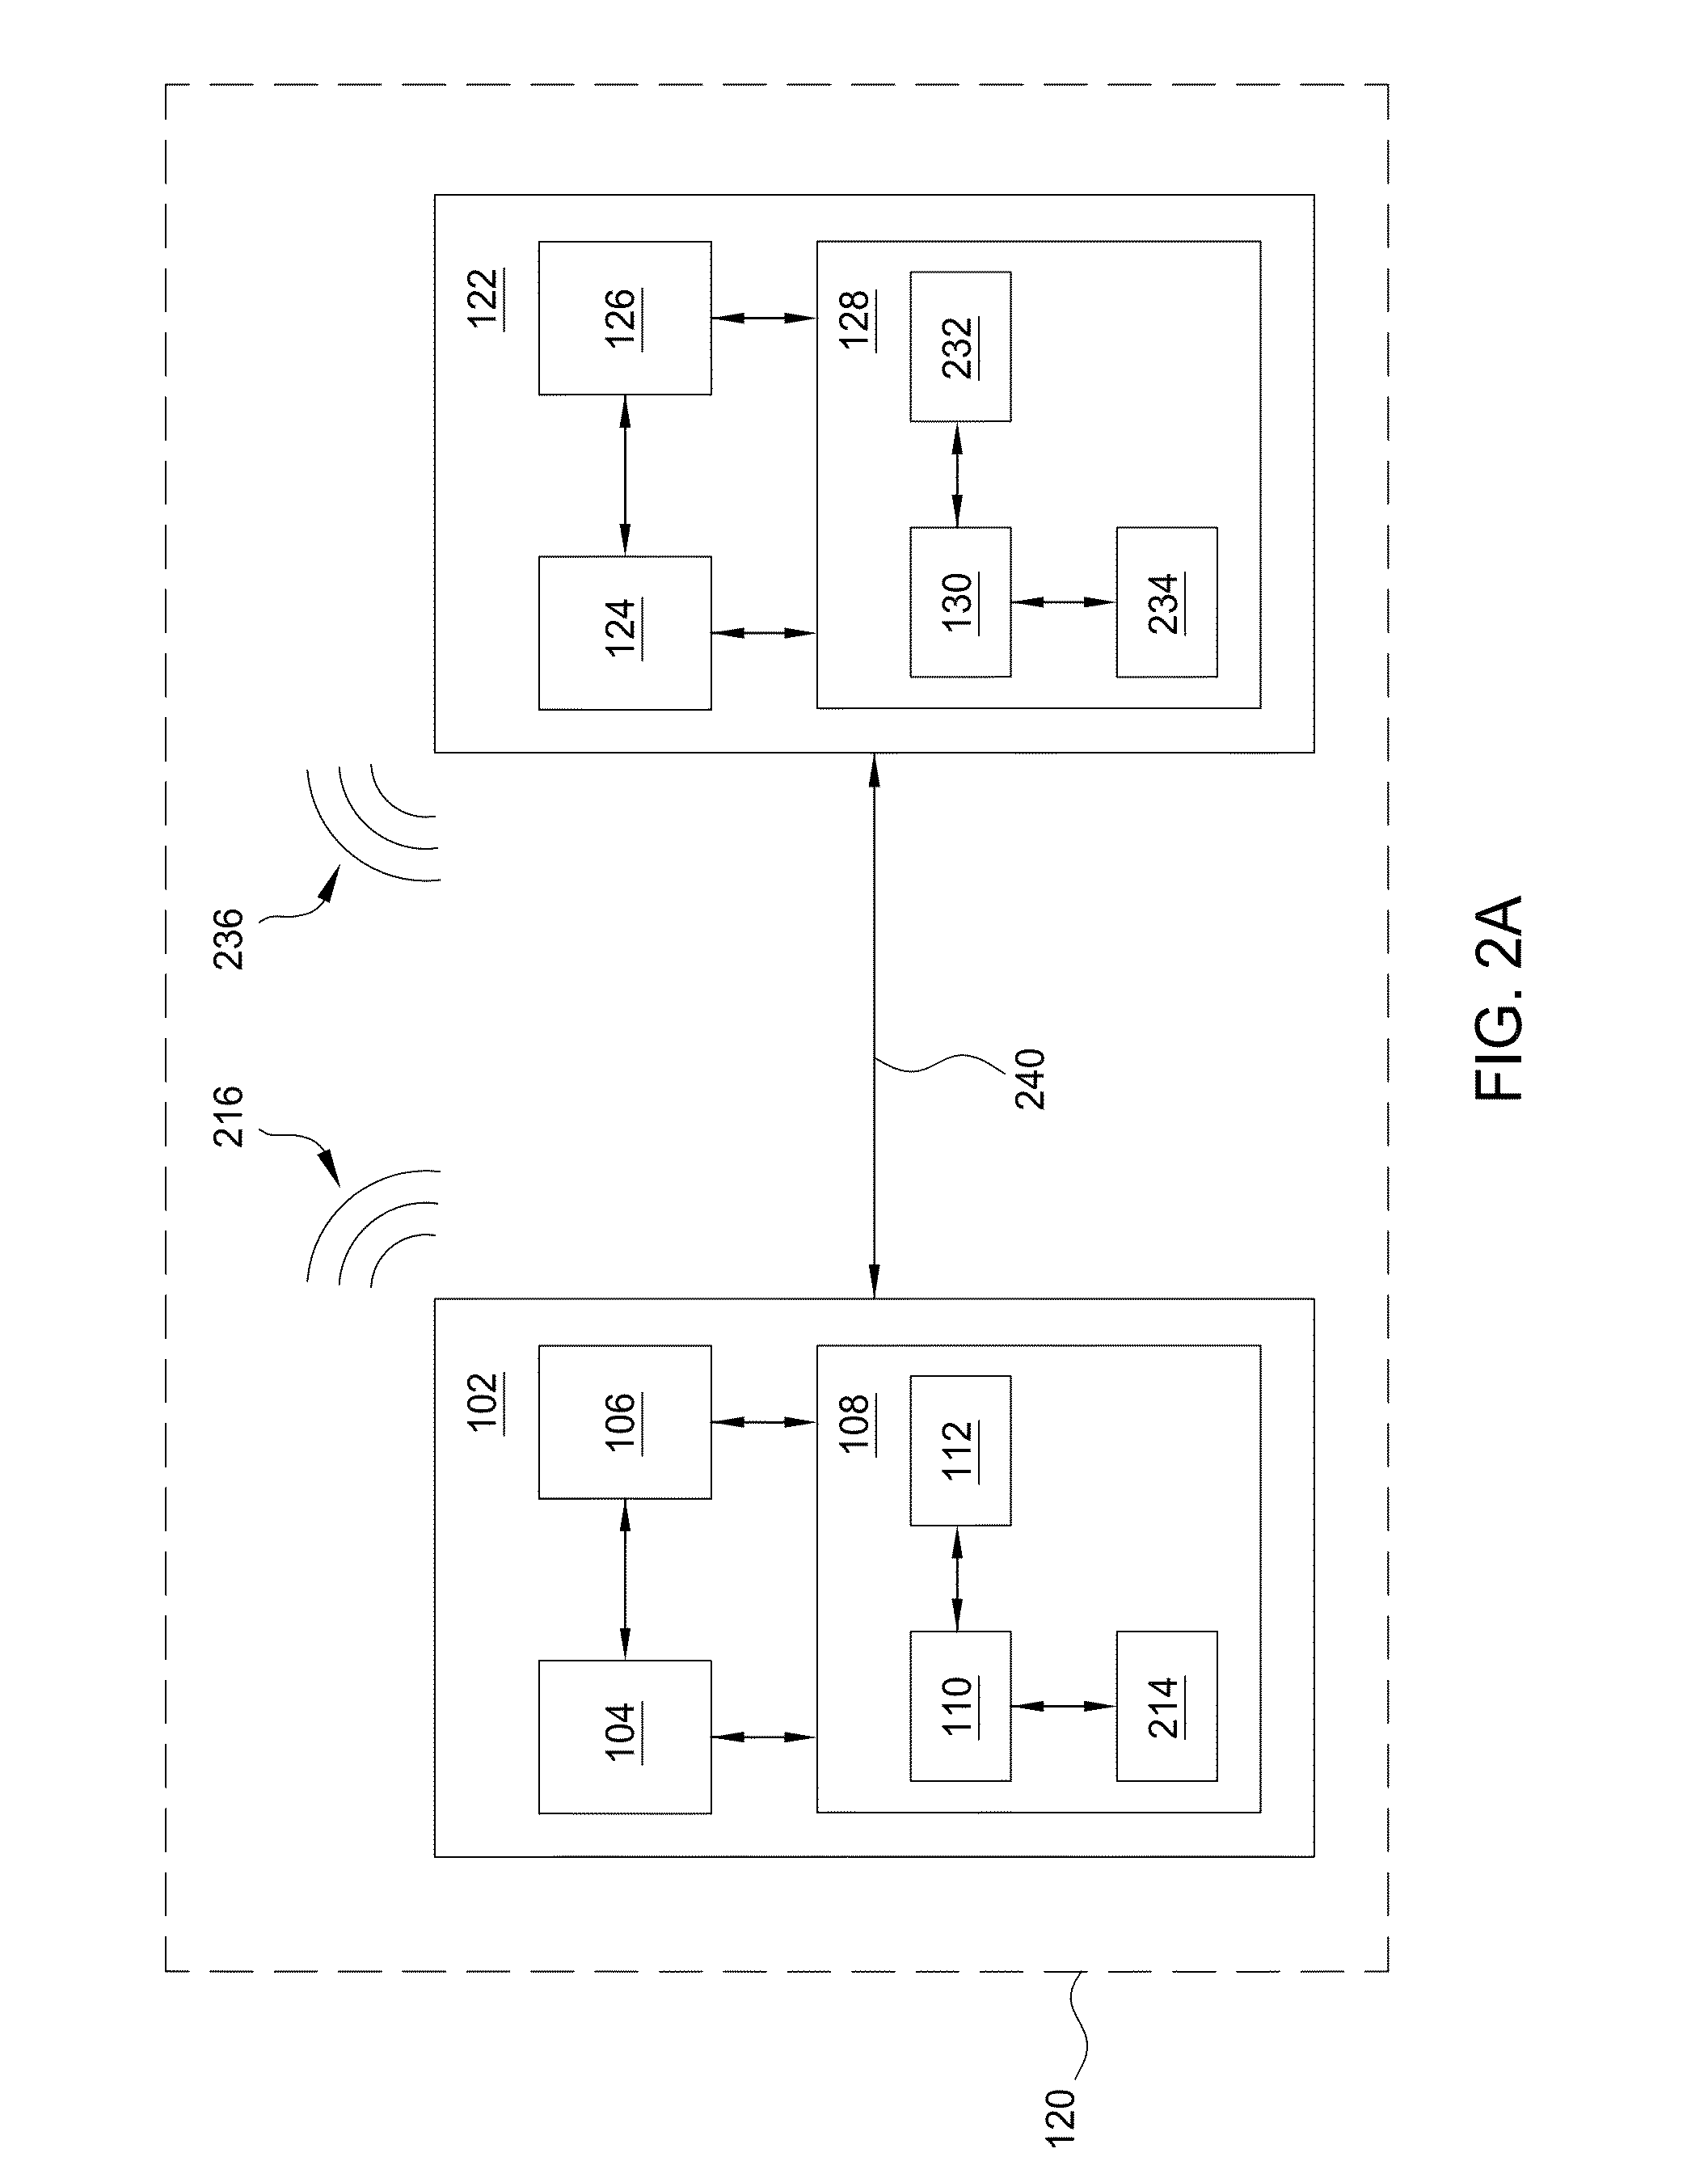 Method and apparatus for controlling portable audio devices